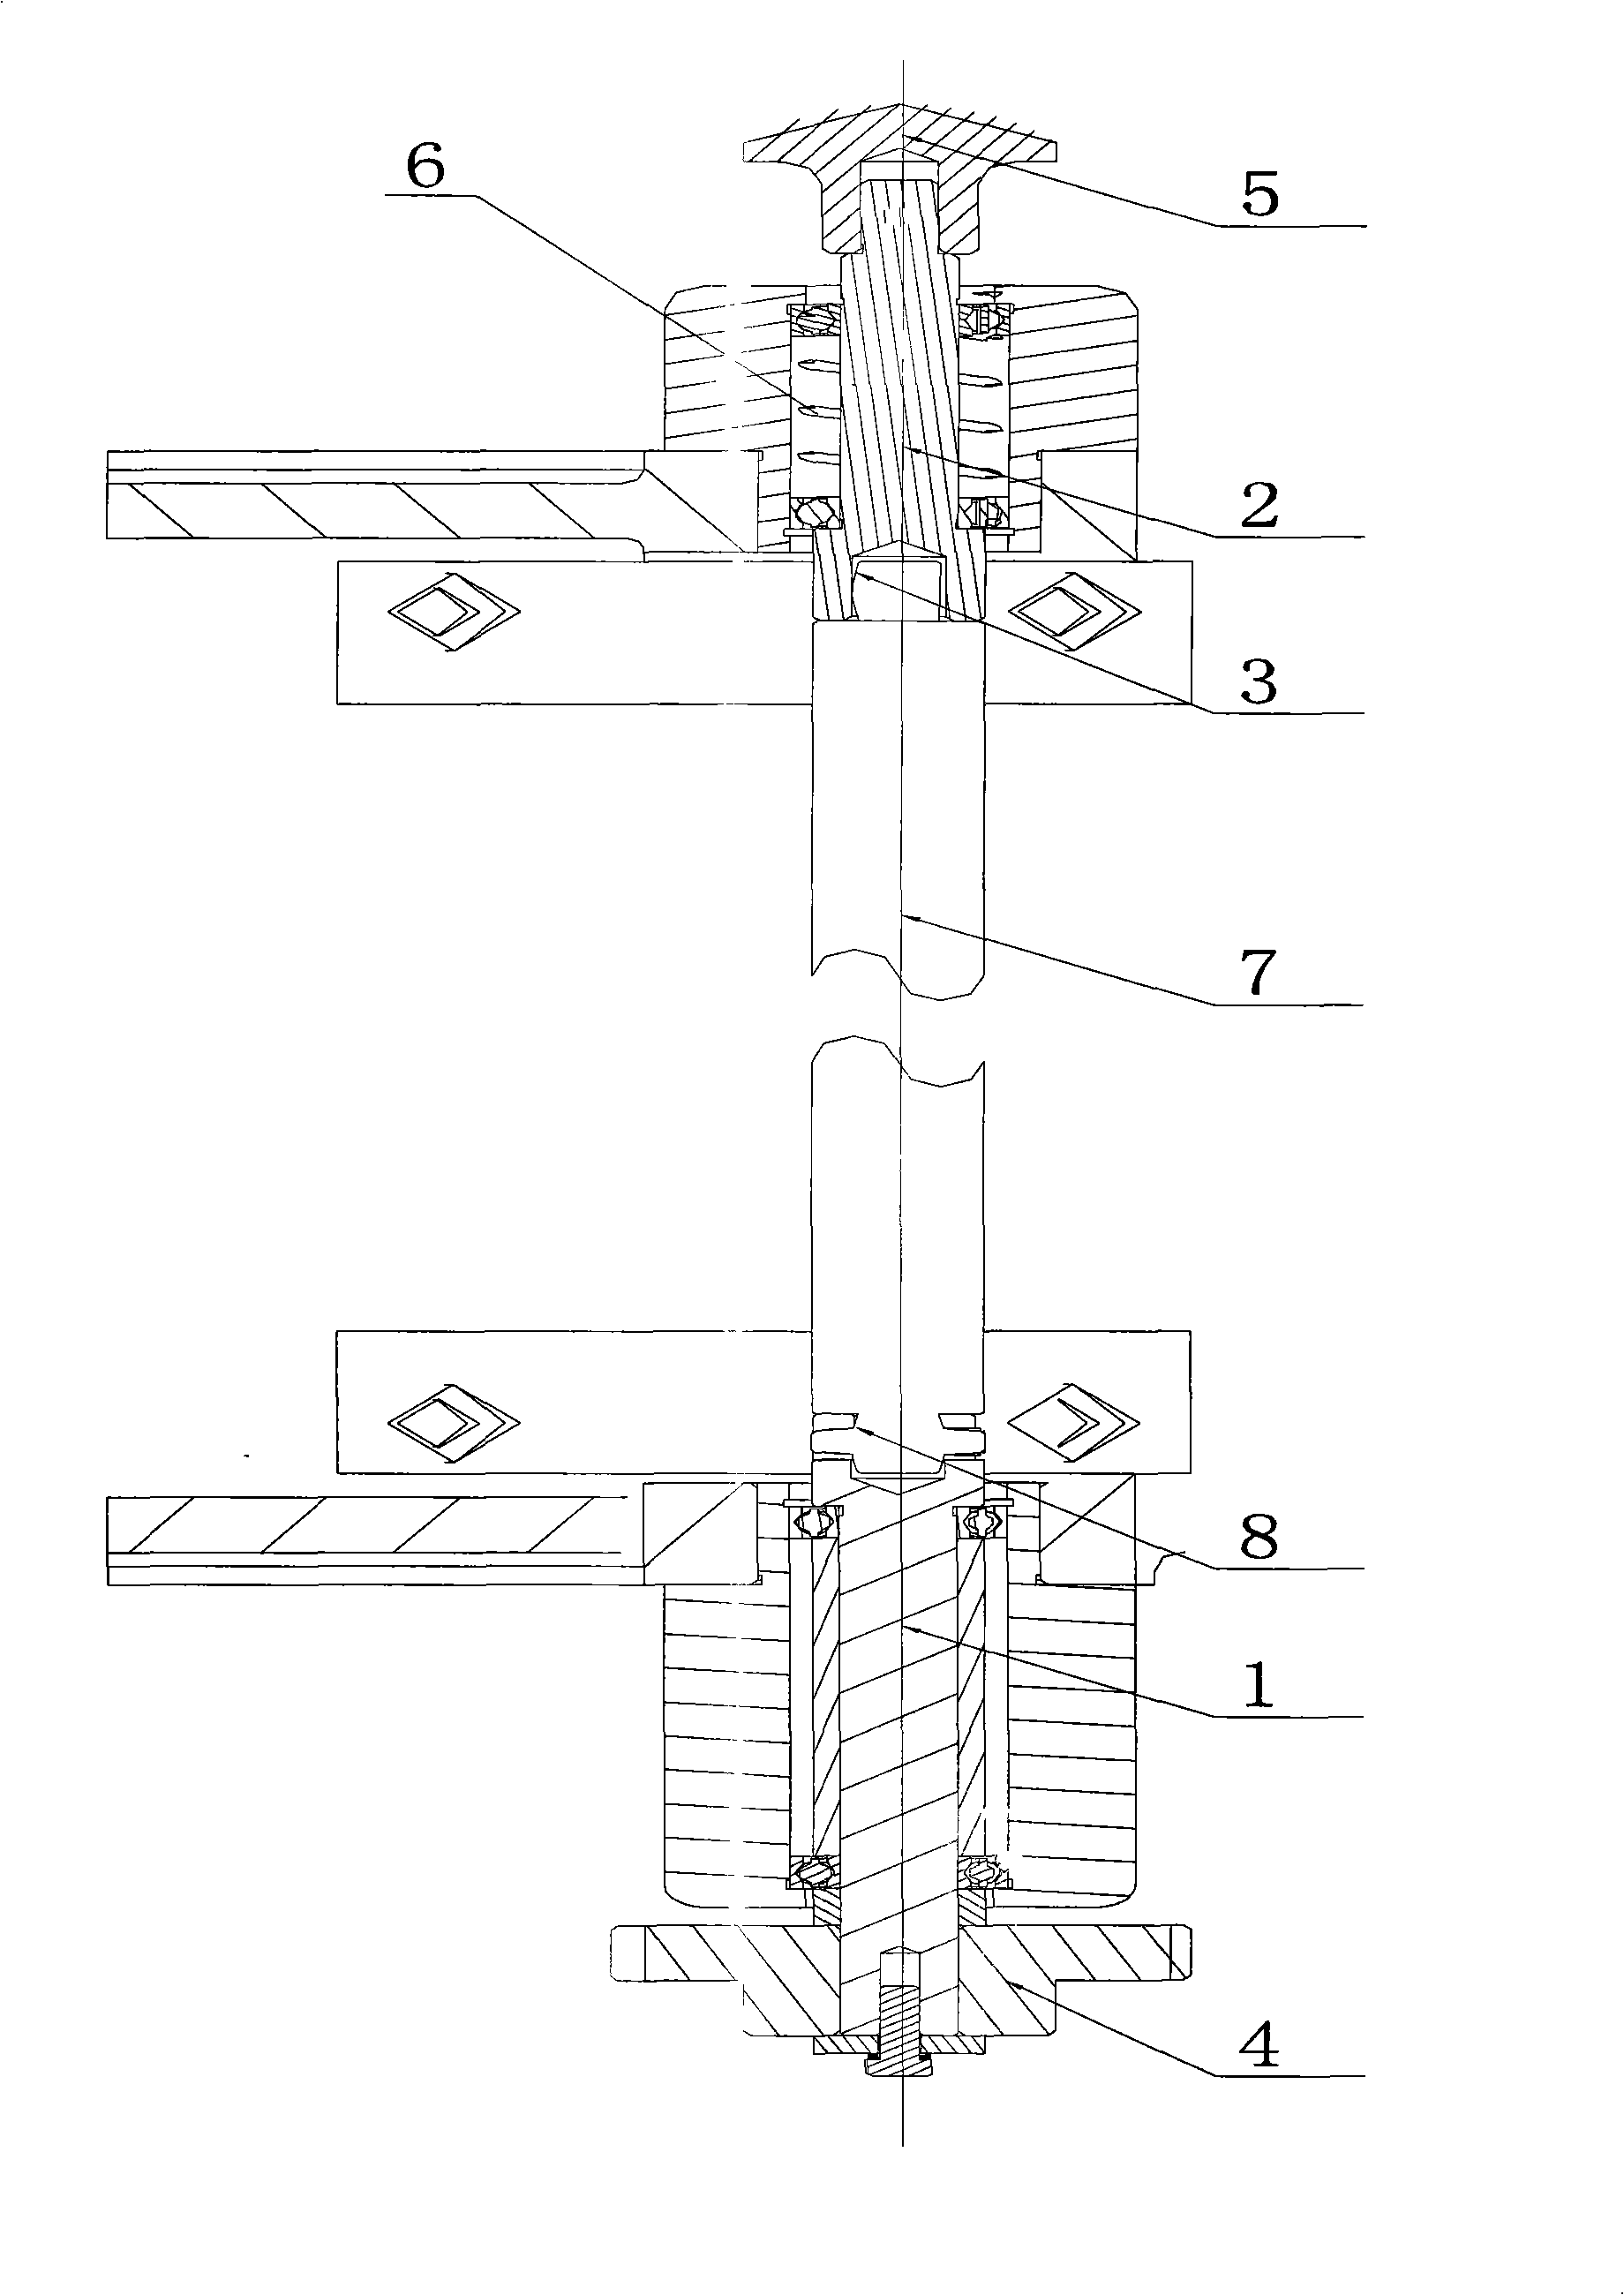 Foil release and foil deployment device of gilding press